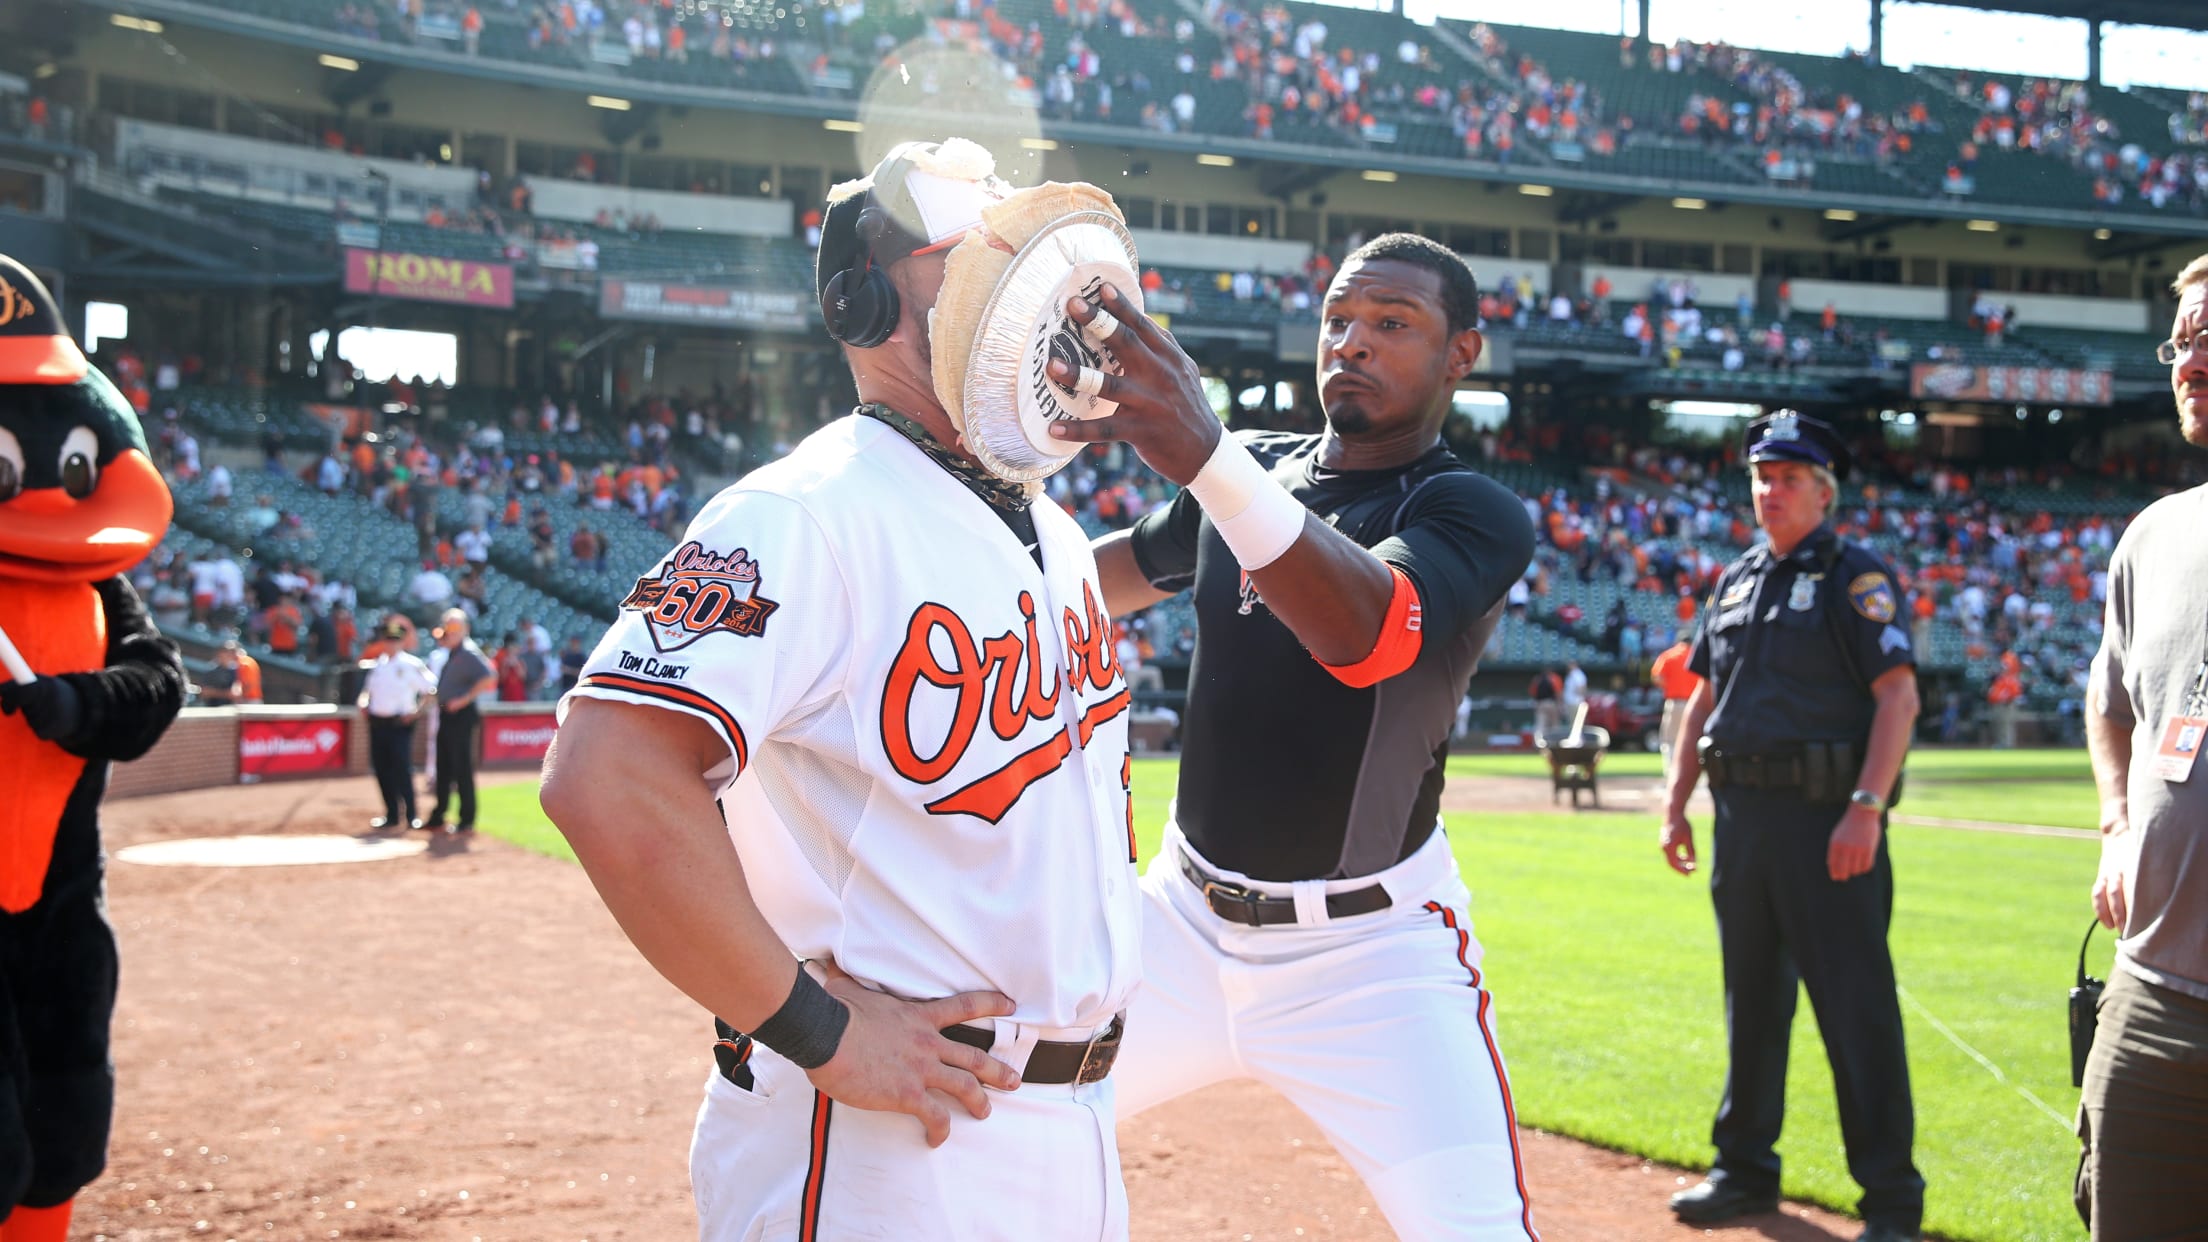 Adam Jones at his first Orioles game in 5 years, looking fresh. : r/baseball